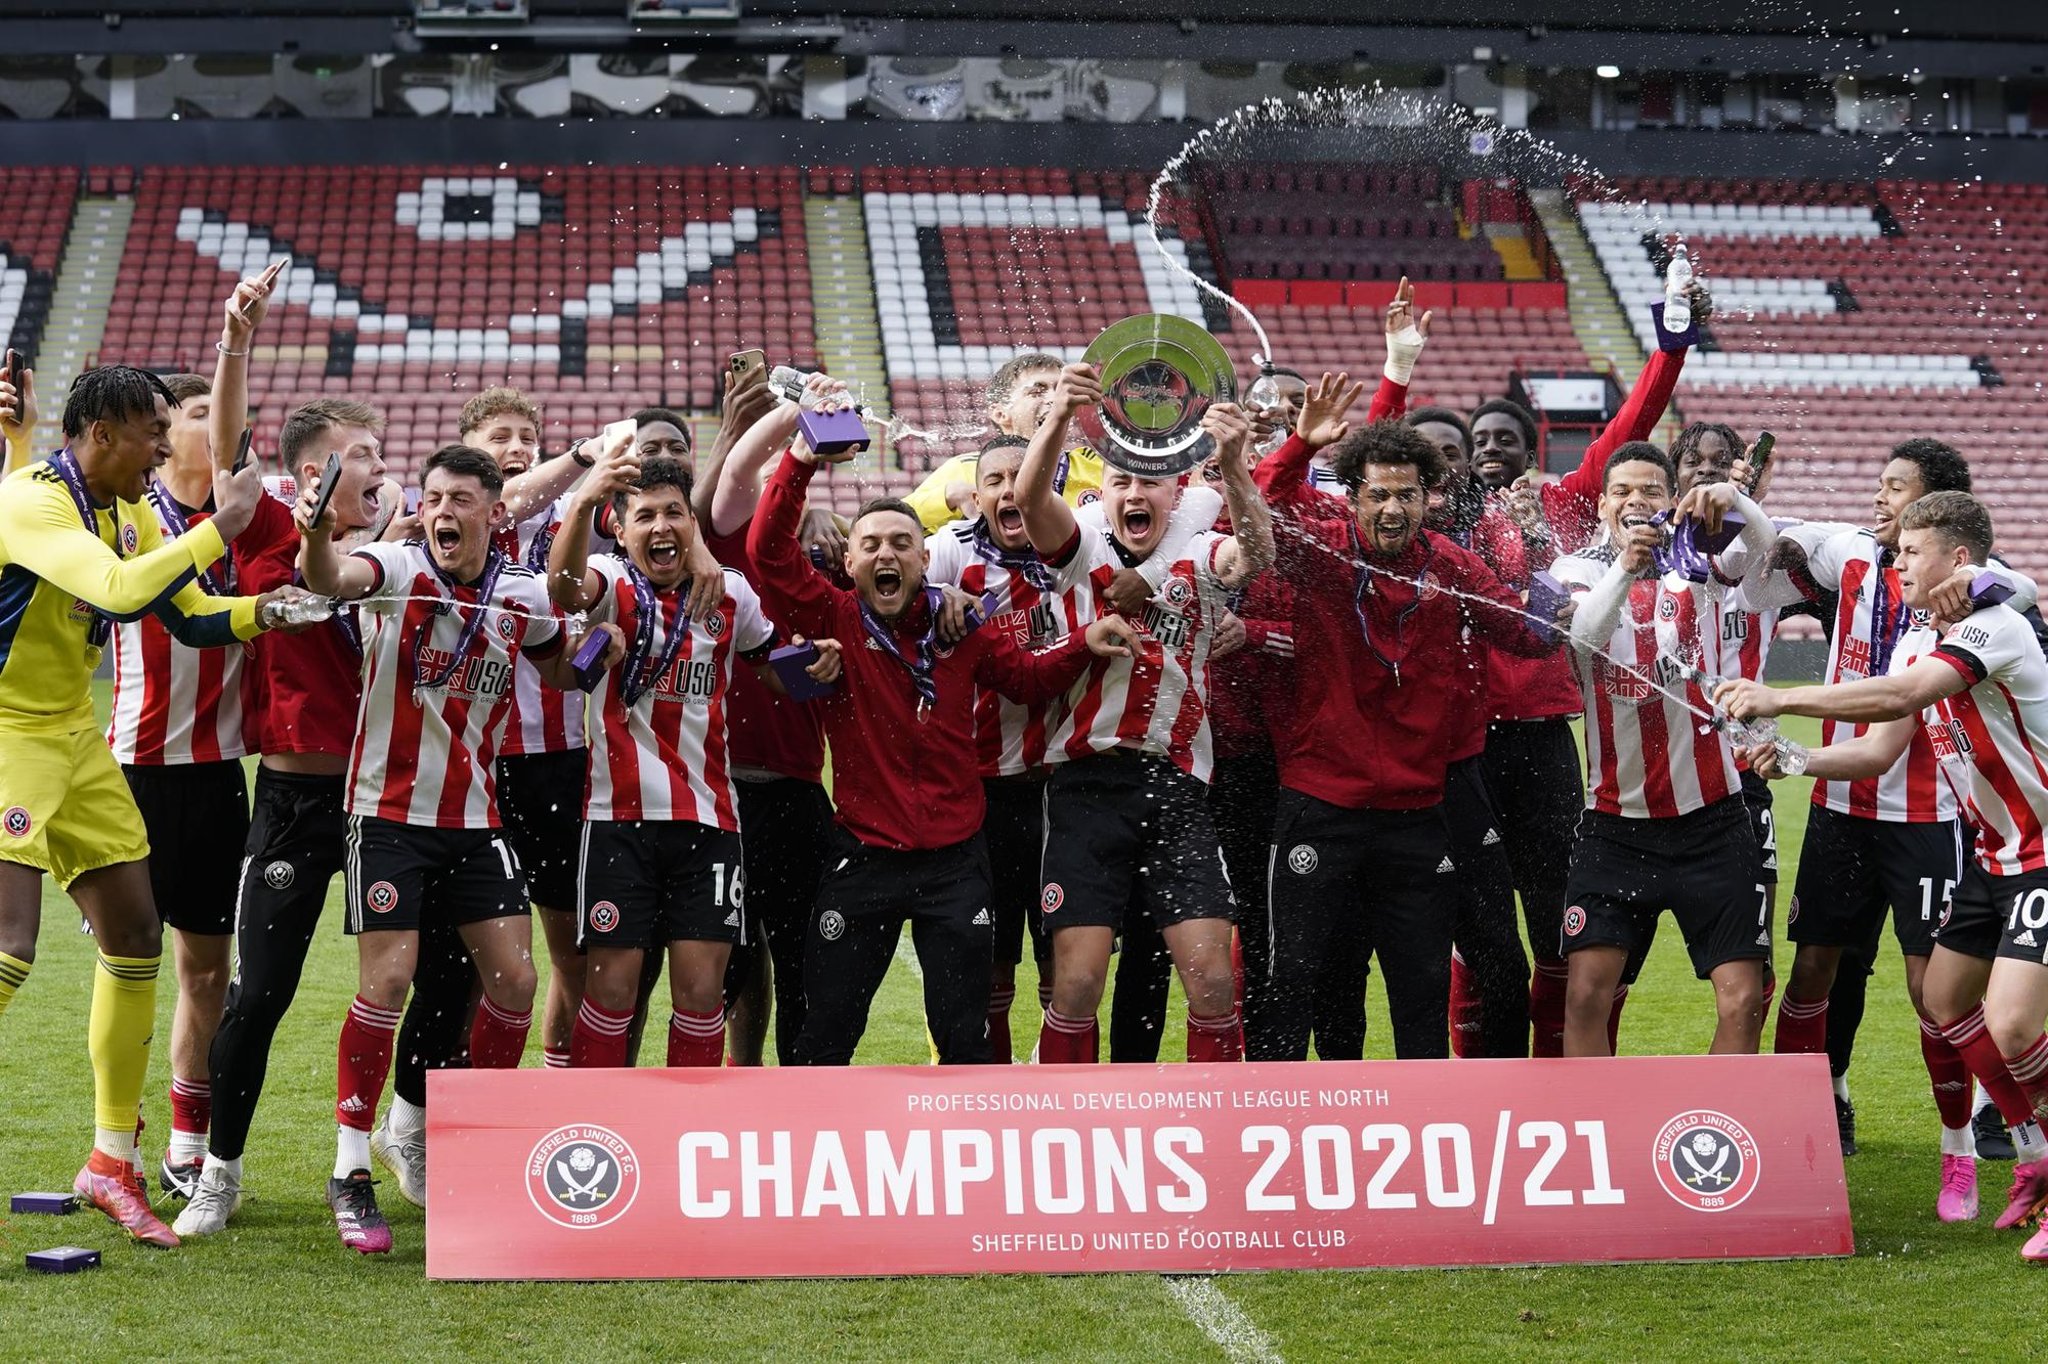 Scenes of joy as Sheffield United's U23s get hands on league trophy - but  skipper says hard work isn't over yet ahead of play-off date with Ipswich |  The Star